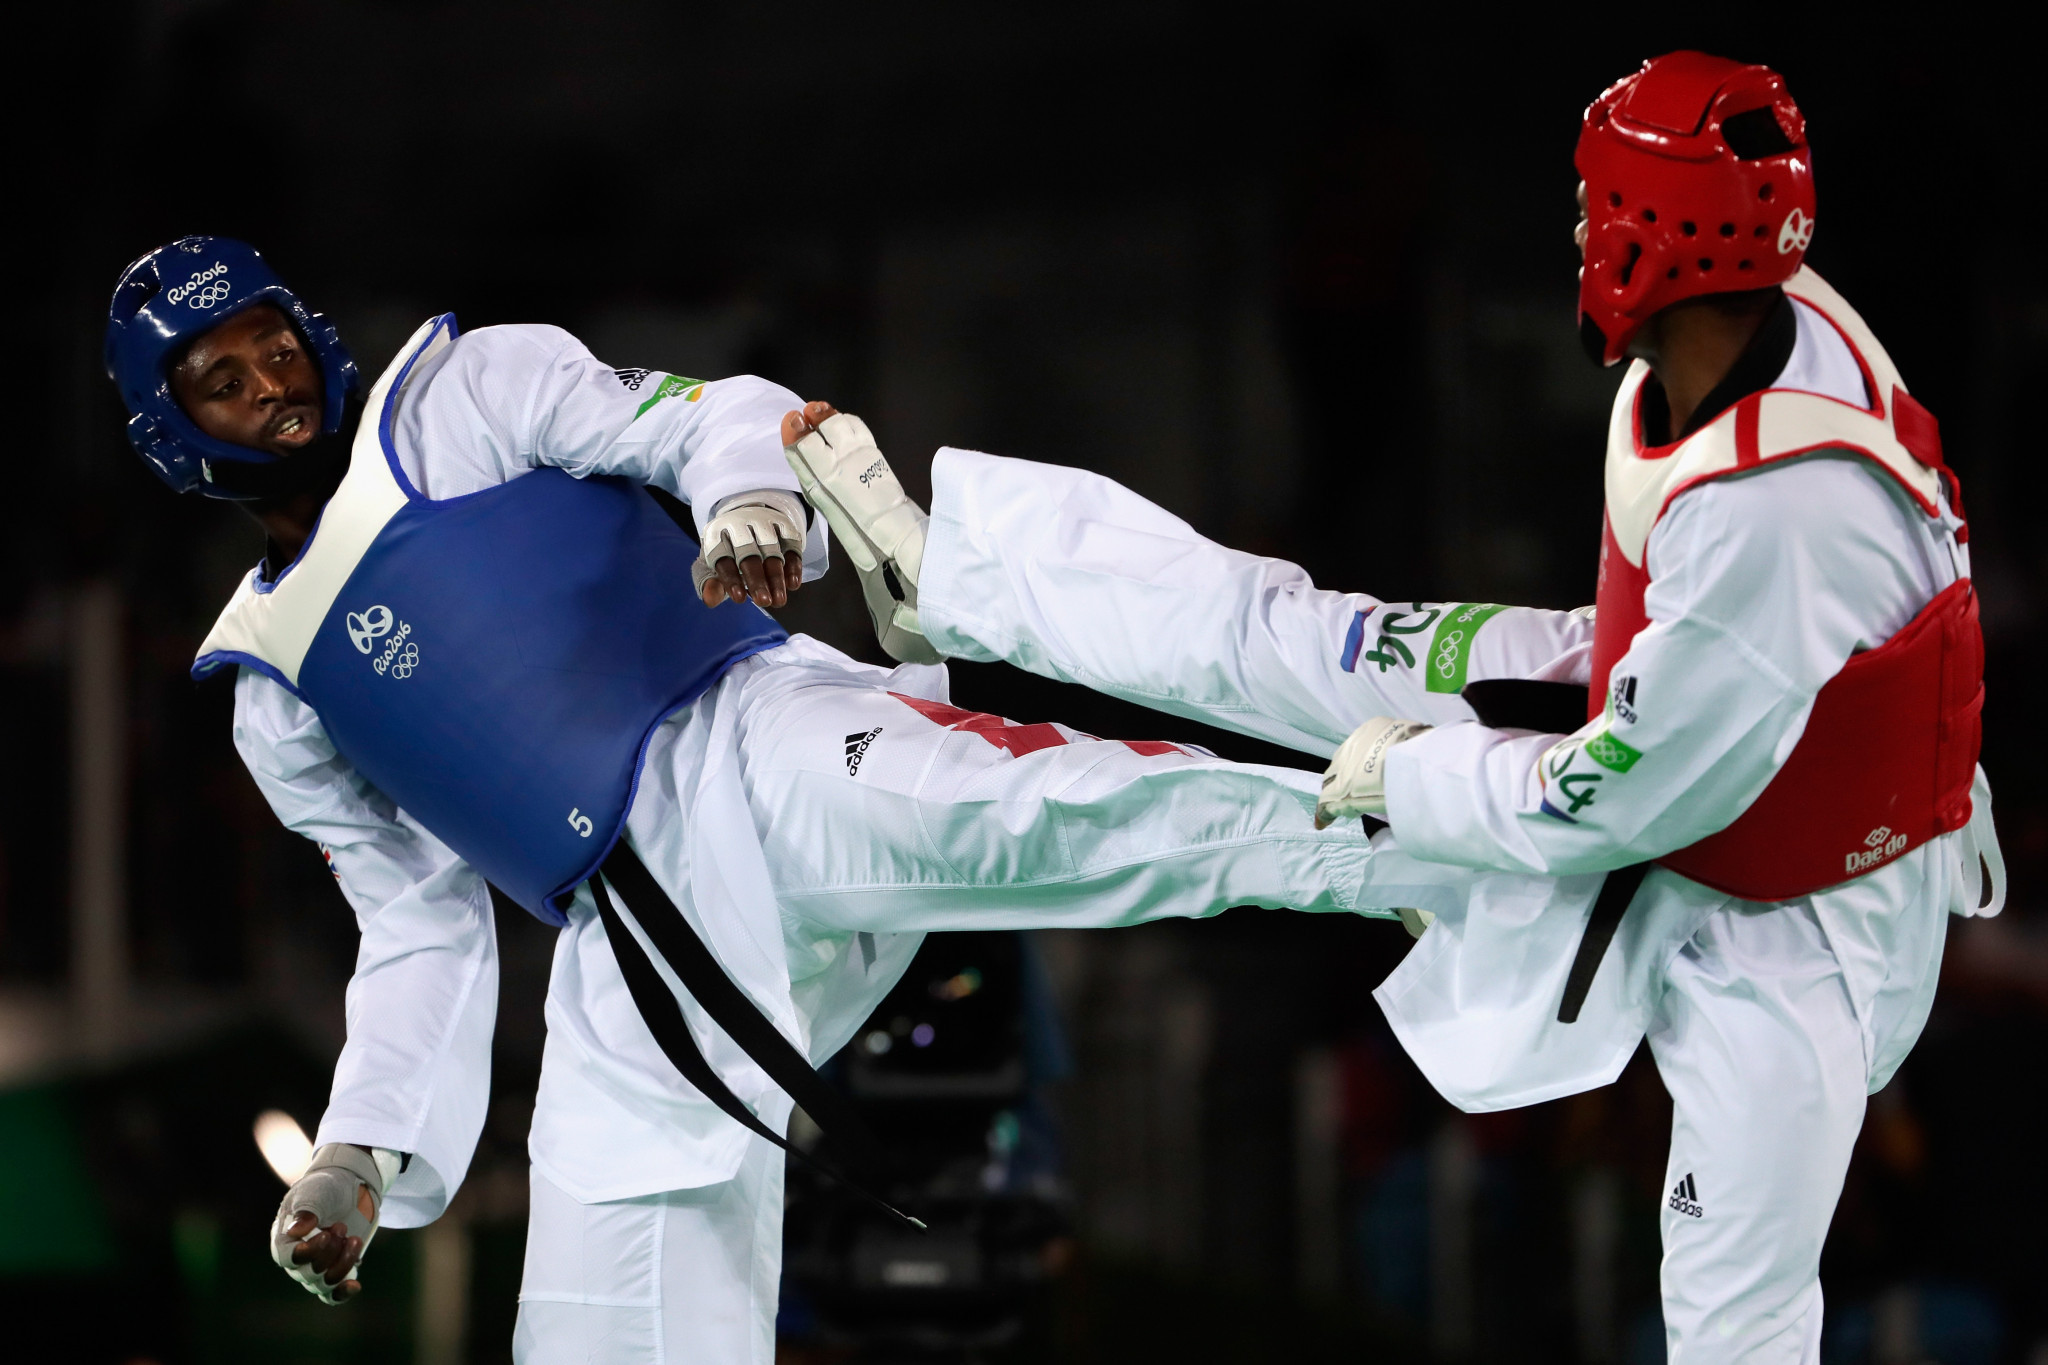 Two gold medals for Great Britain on final day of World Taekwondo President's Cup for Europe region